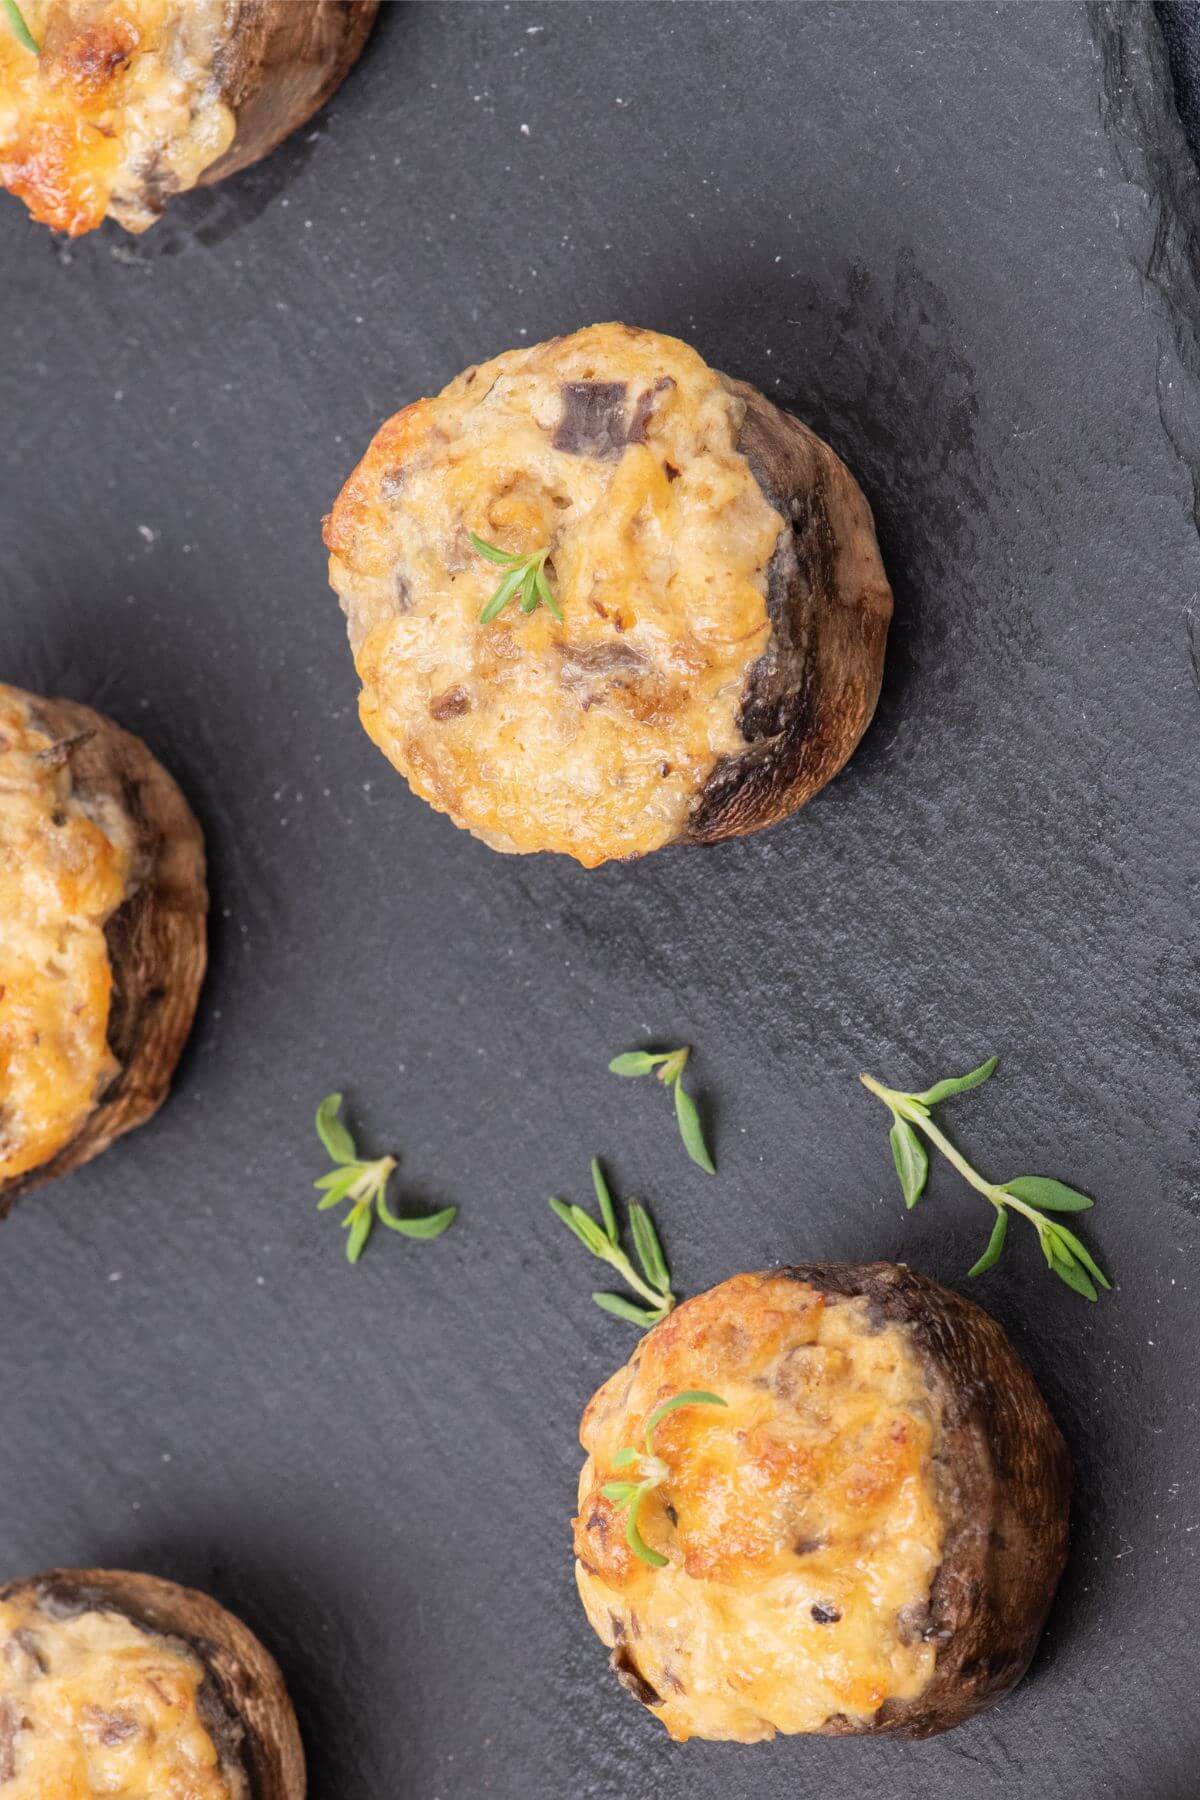 Five stuffed mushrooms are decorated with garnish.